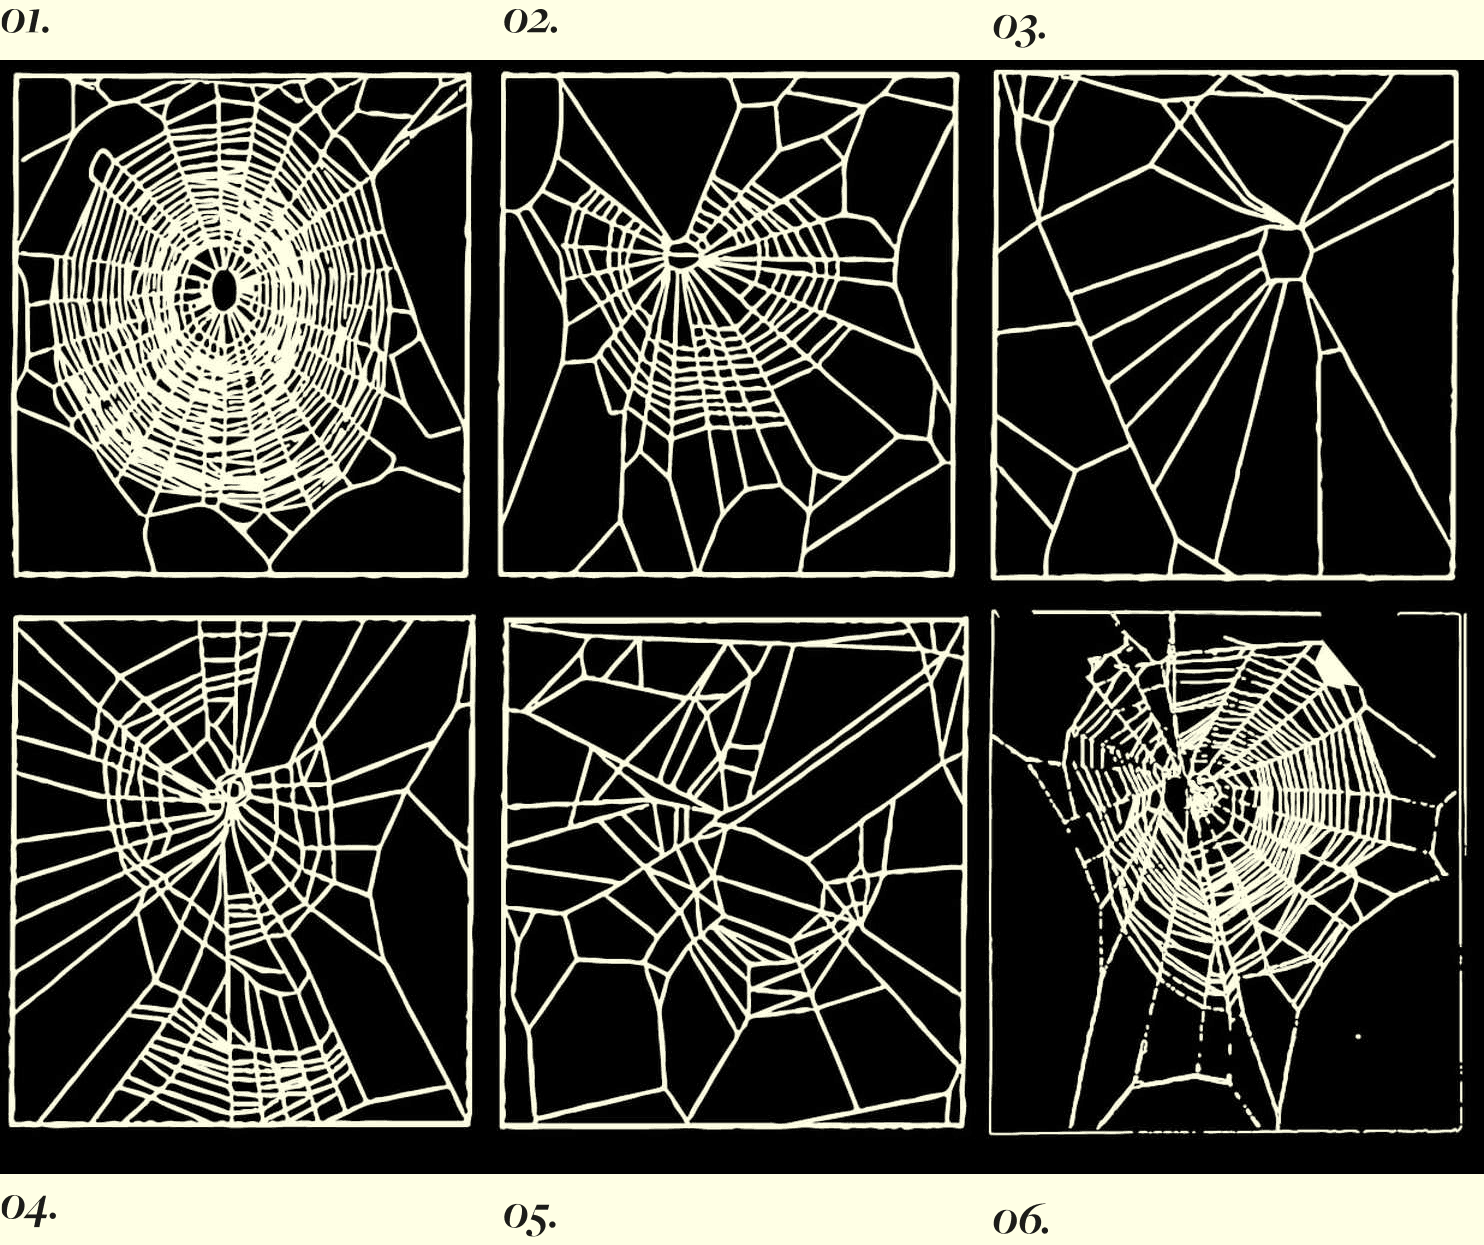 Webs spun by ordinary House Spiders 'high' on various drugs via NASA